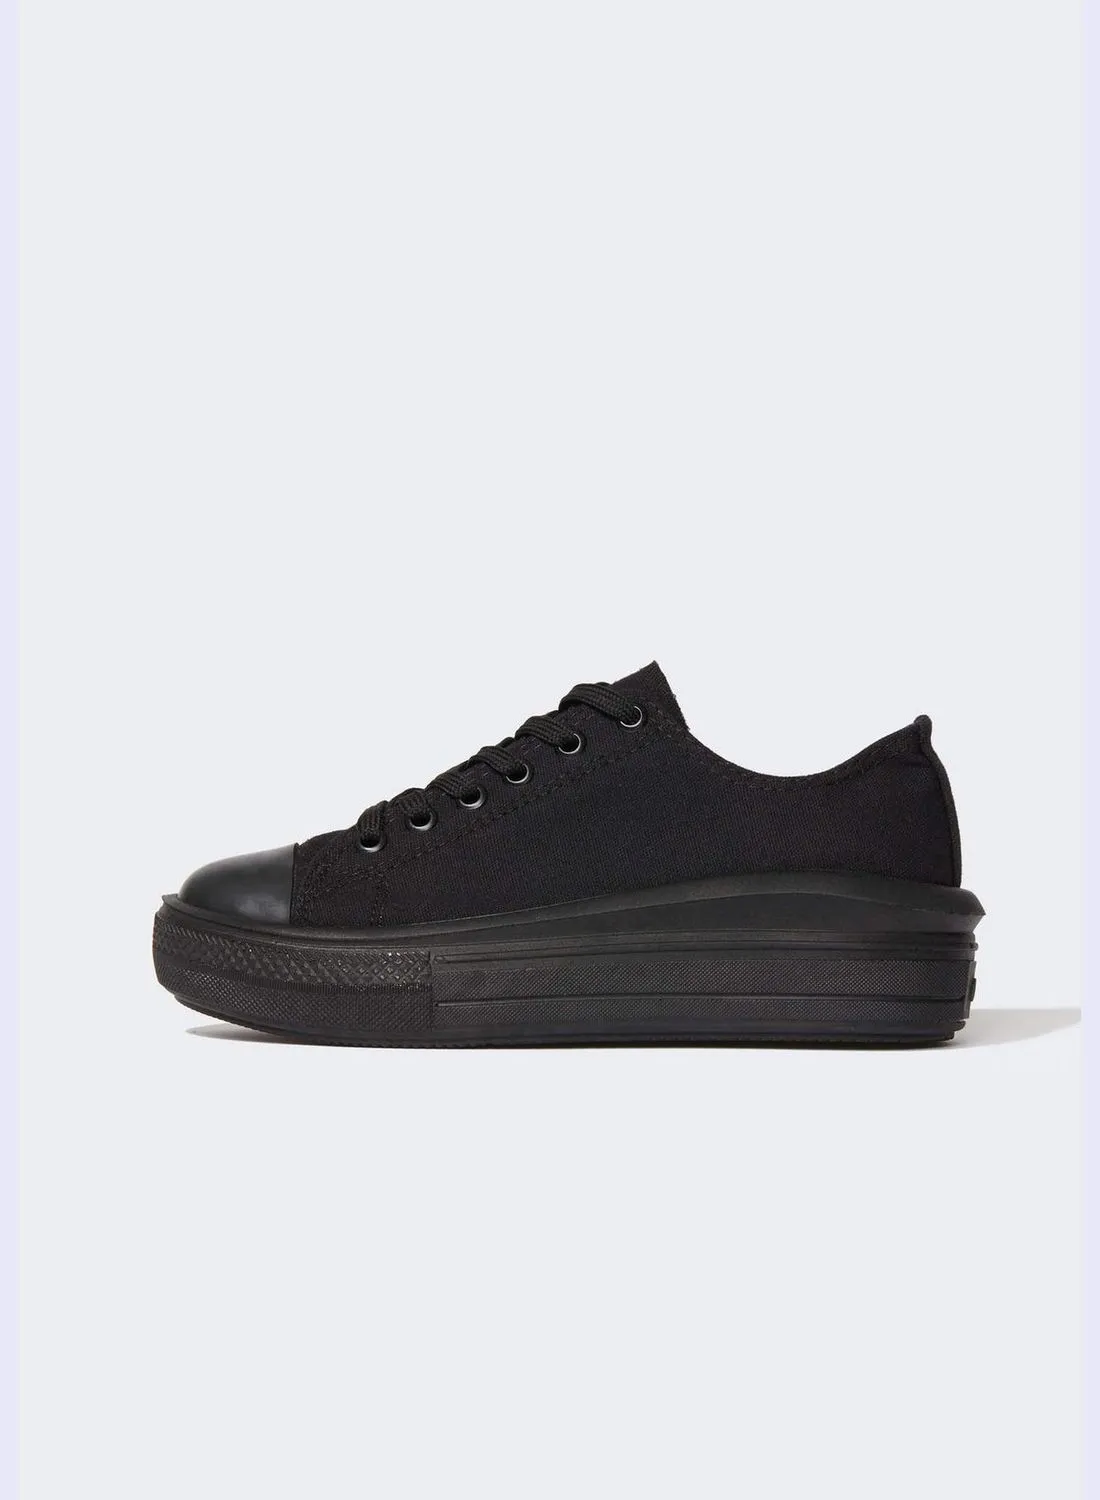 DeFacto Hihg Sole Lace Up Trainers